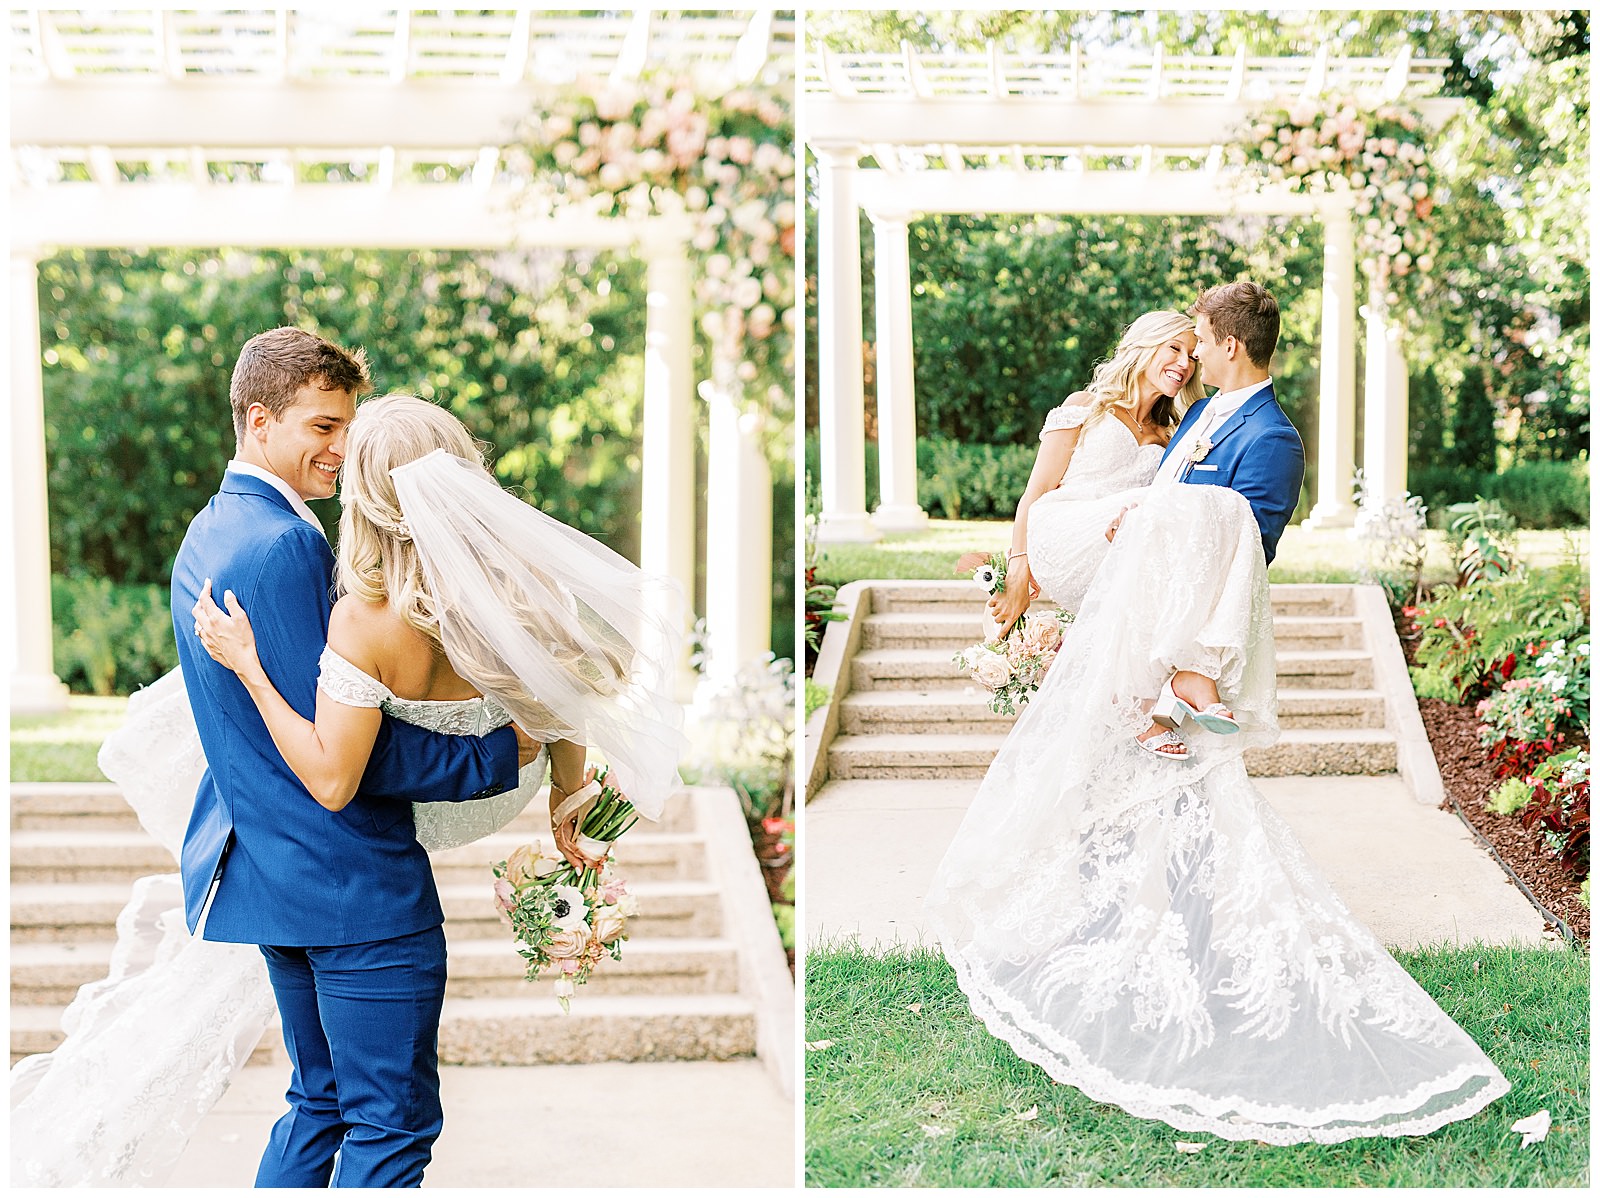 lace dress blond haired bride and dapper navy royal blue groom portraits outdoors under arch at separk mansion summer wedding